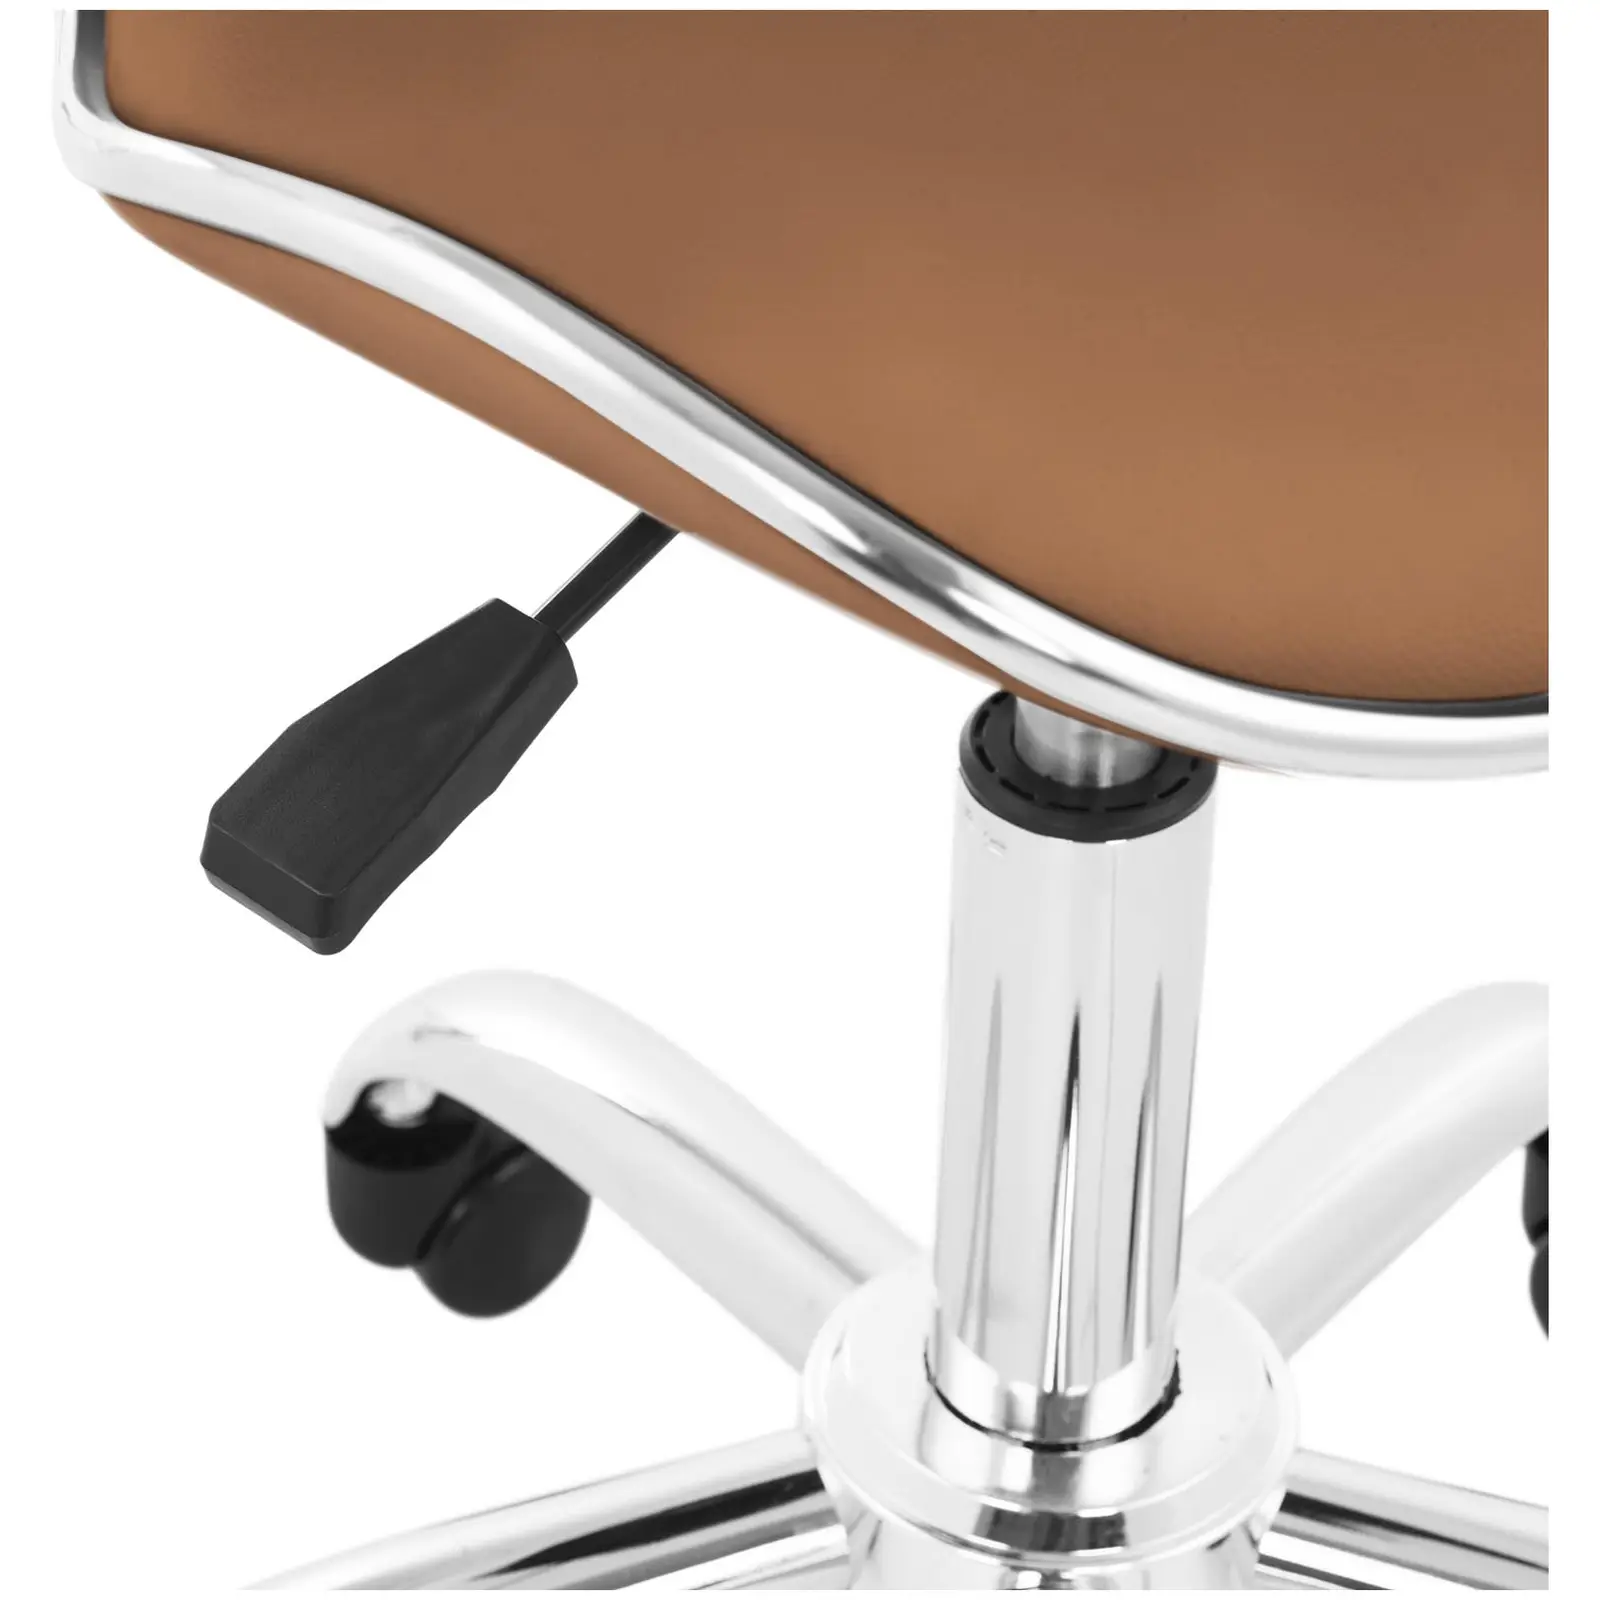 Stool Chair with Back  - Seat Height 48 - 62Cm / Height 68 - 82Cm mm - 150 kg - Cappuccino